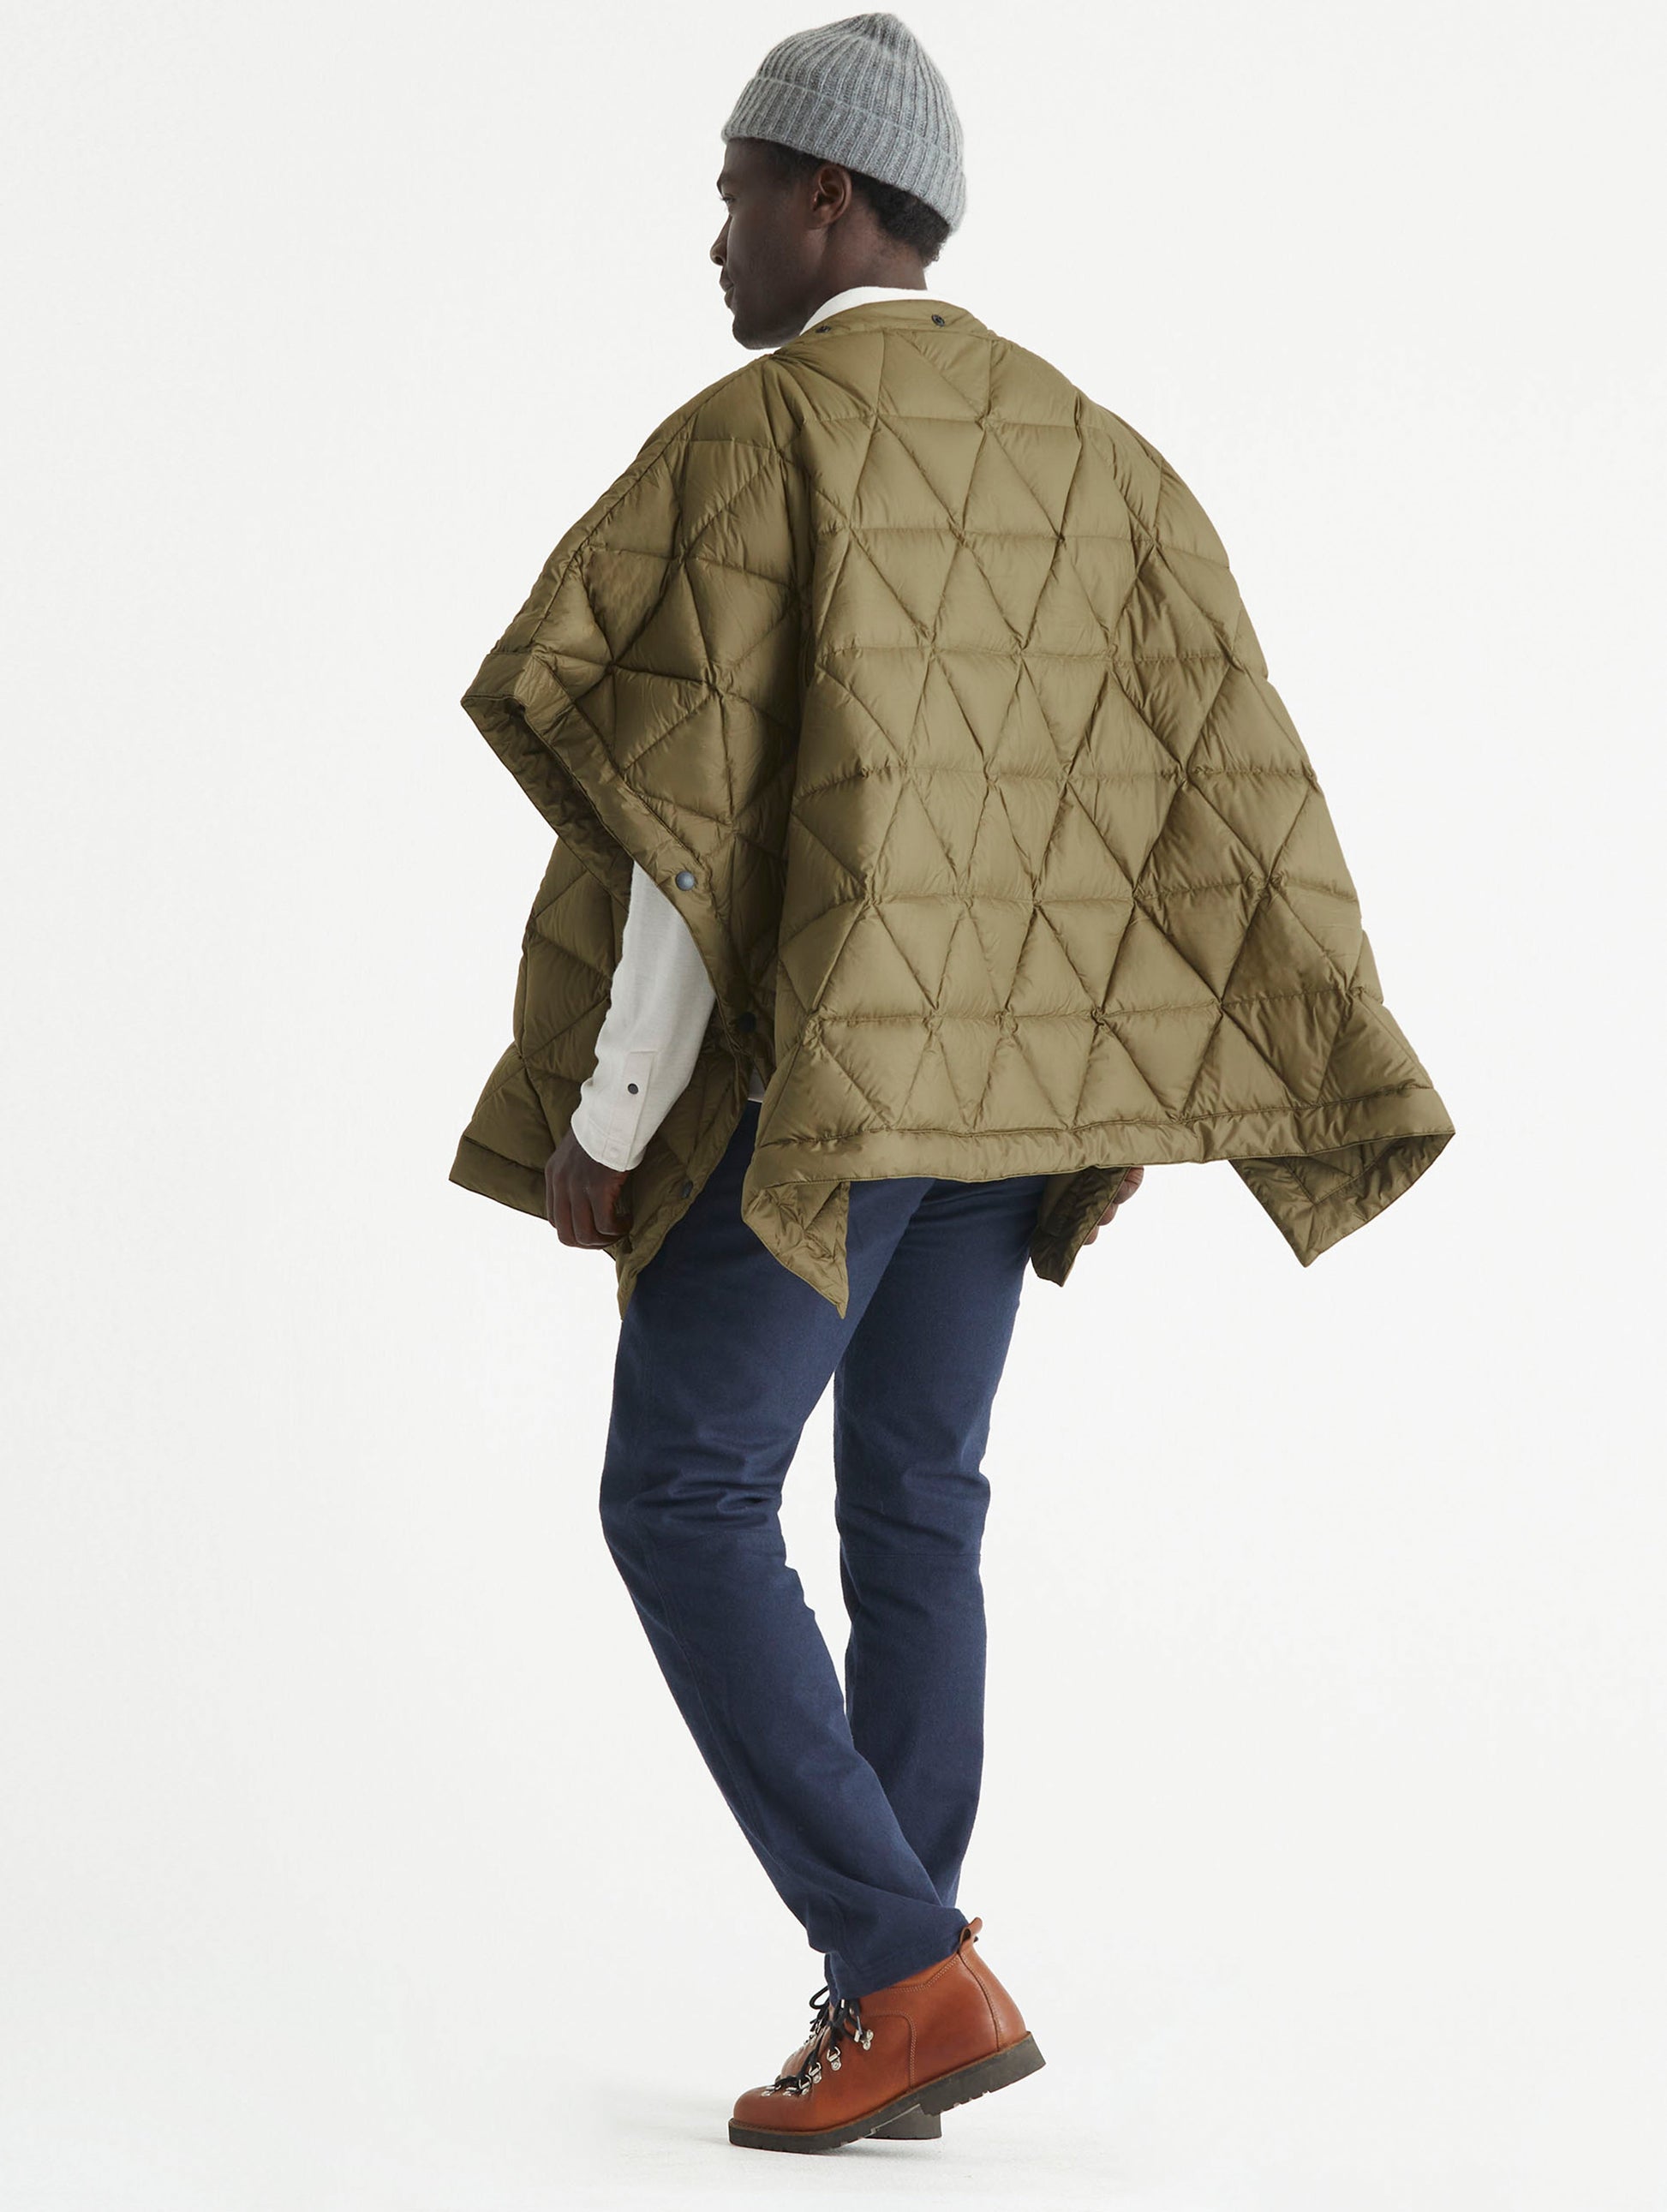 quilted poncho from Aether Apparel